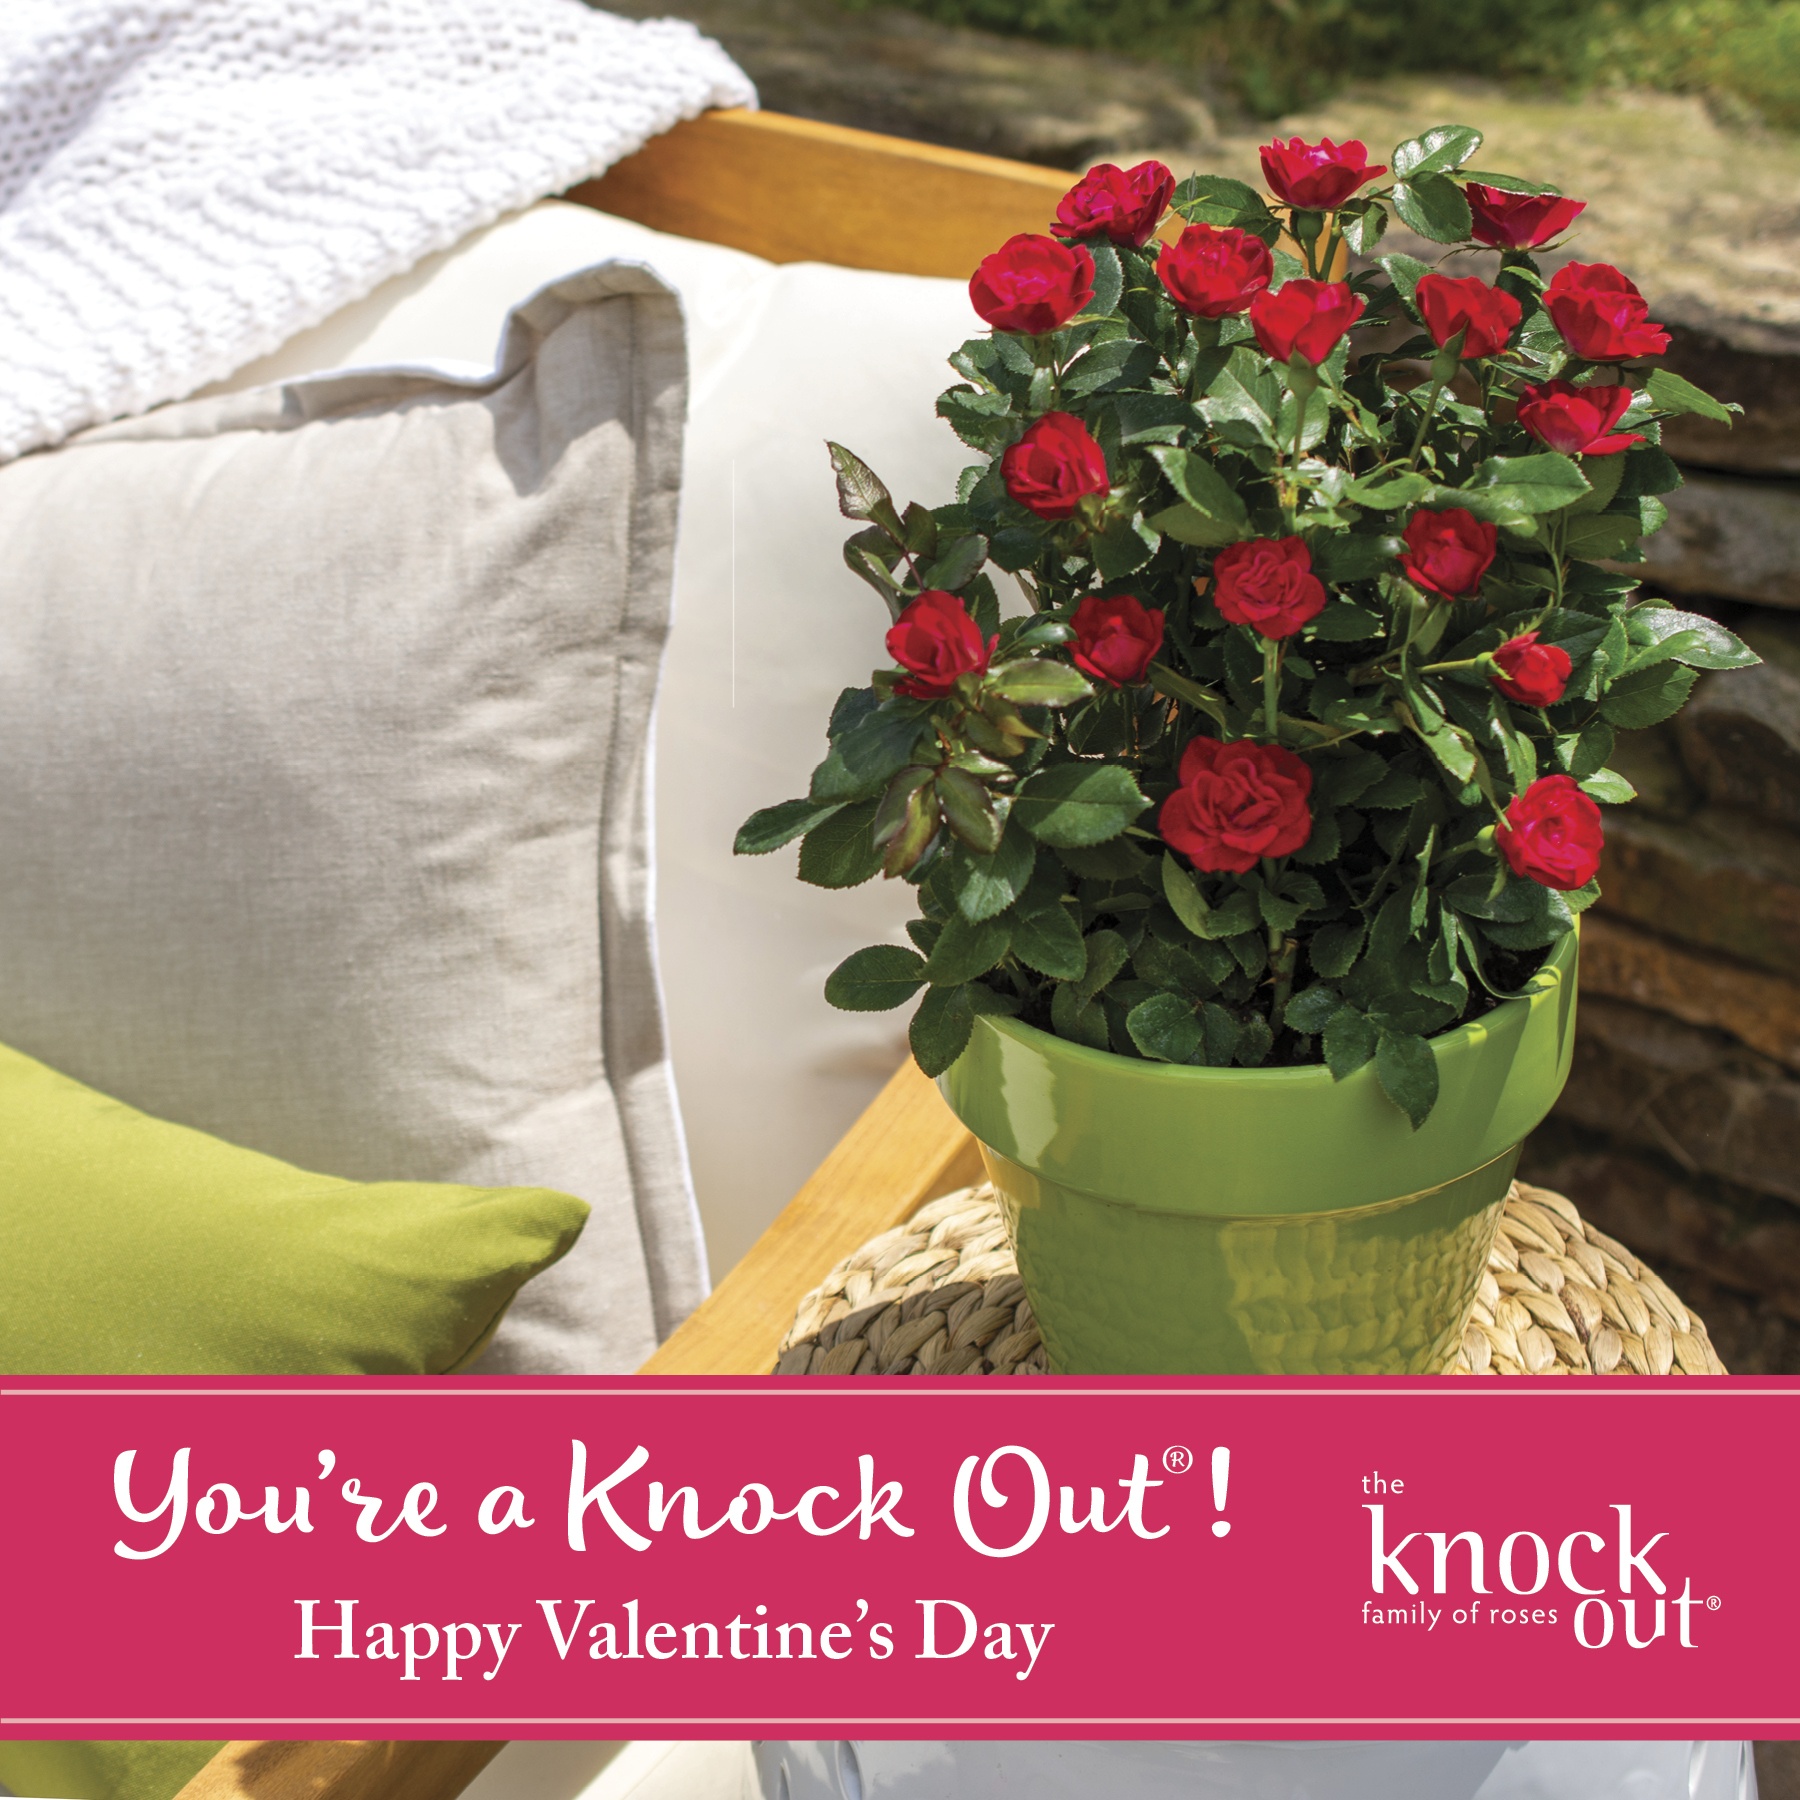 Open You're a Knock Out Happy Valentine's Day Petite Knock Out Instagram Image